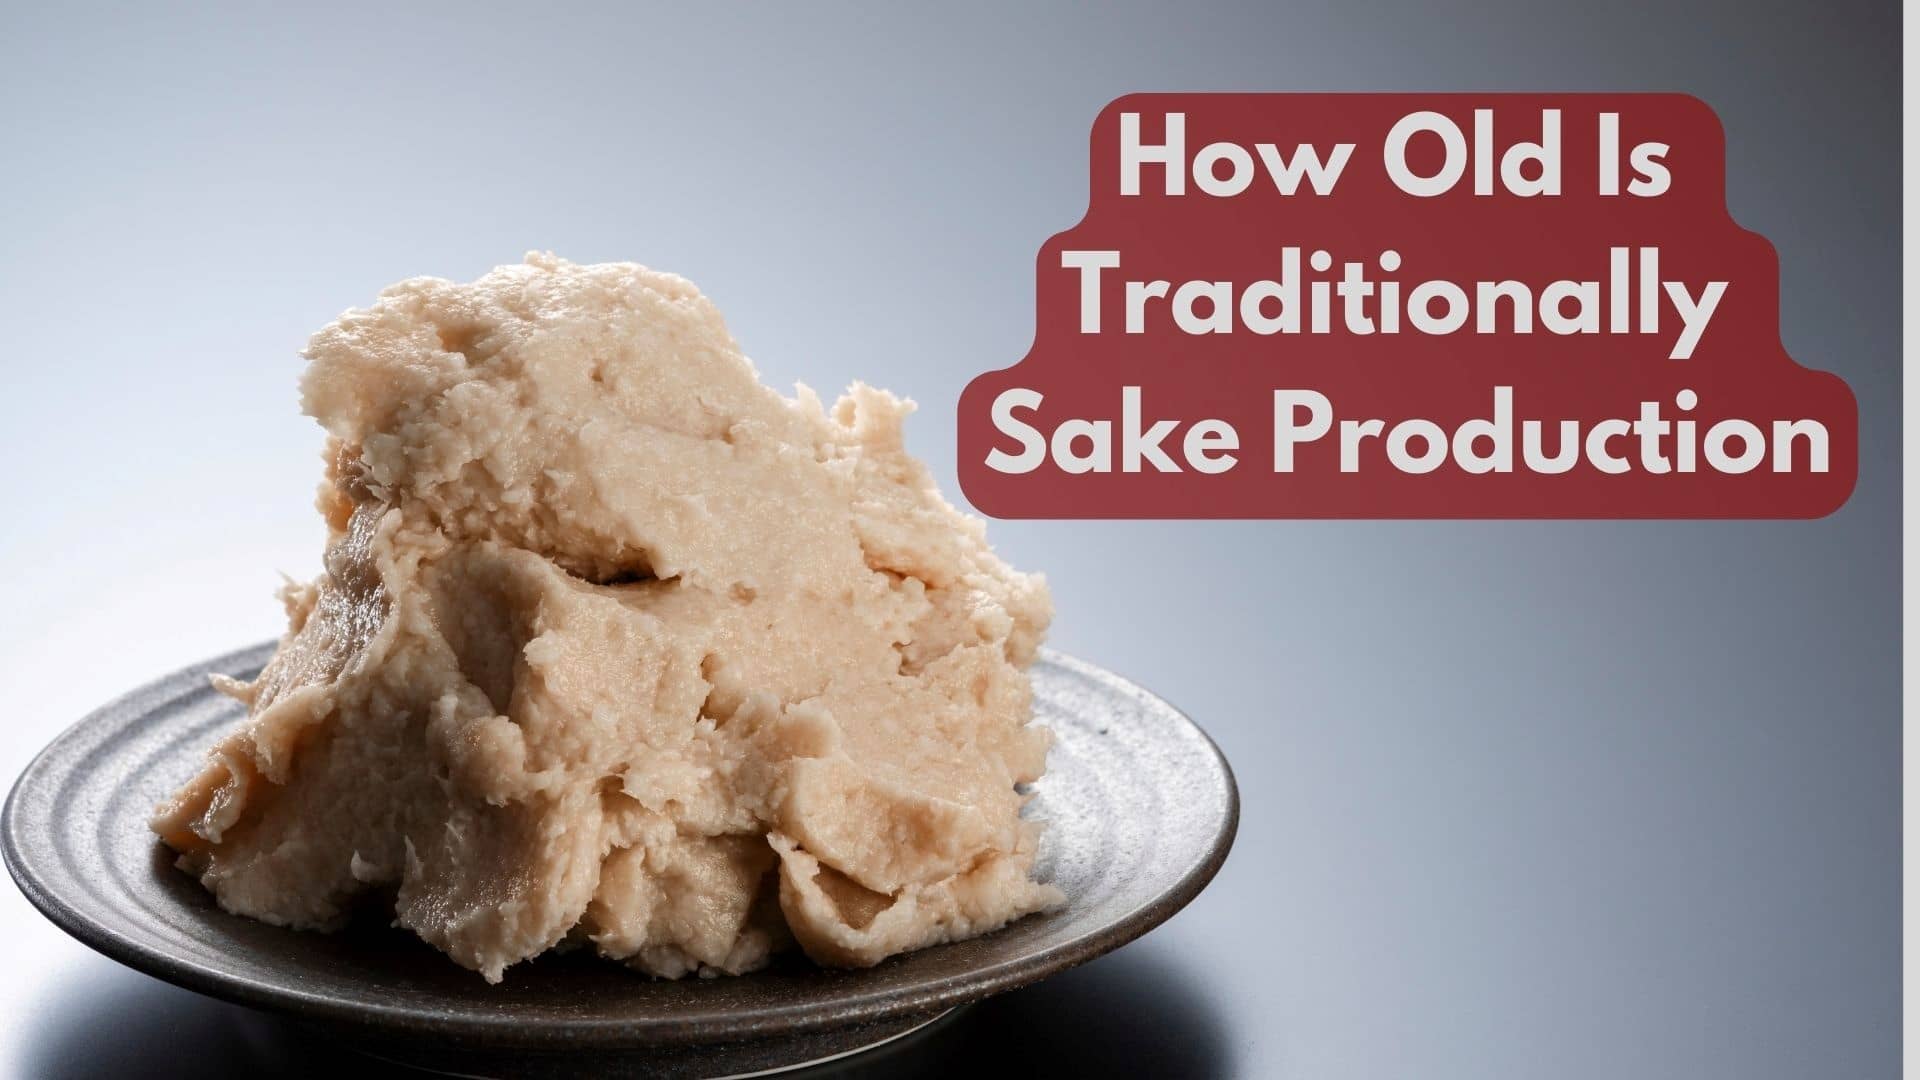 How Old Is Traditionally Sake Production